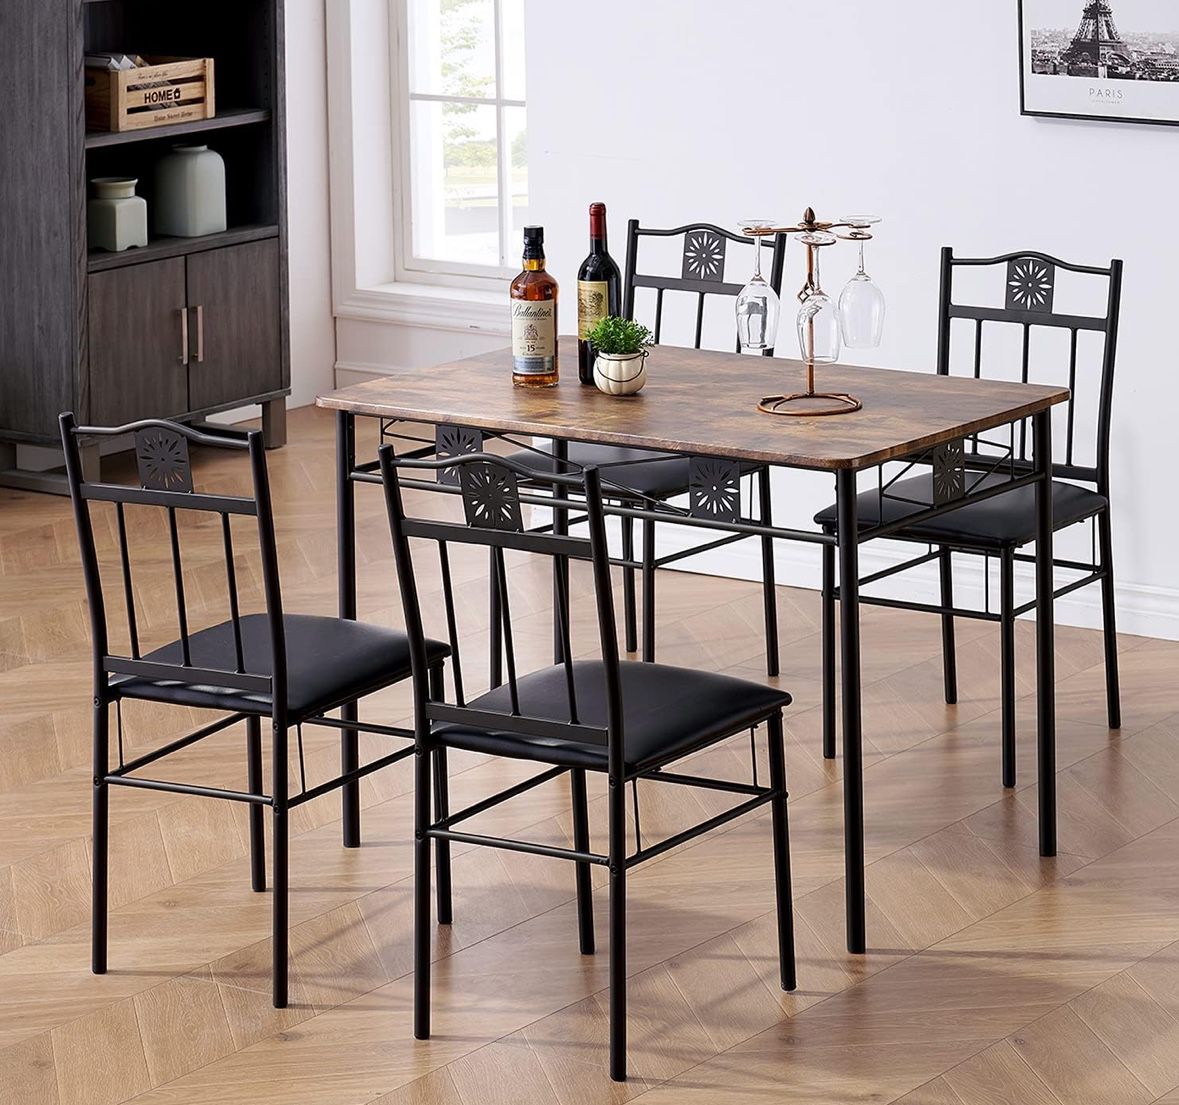 Dining Table Set - Includes Table And (4) Chairs 